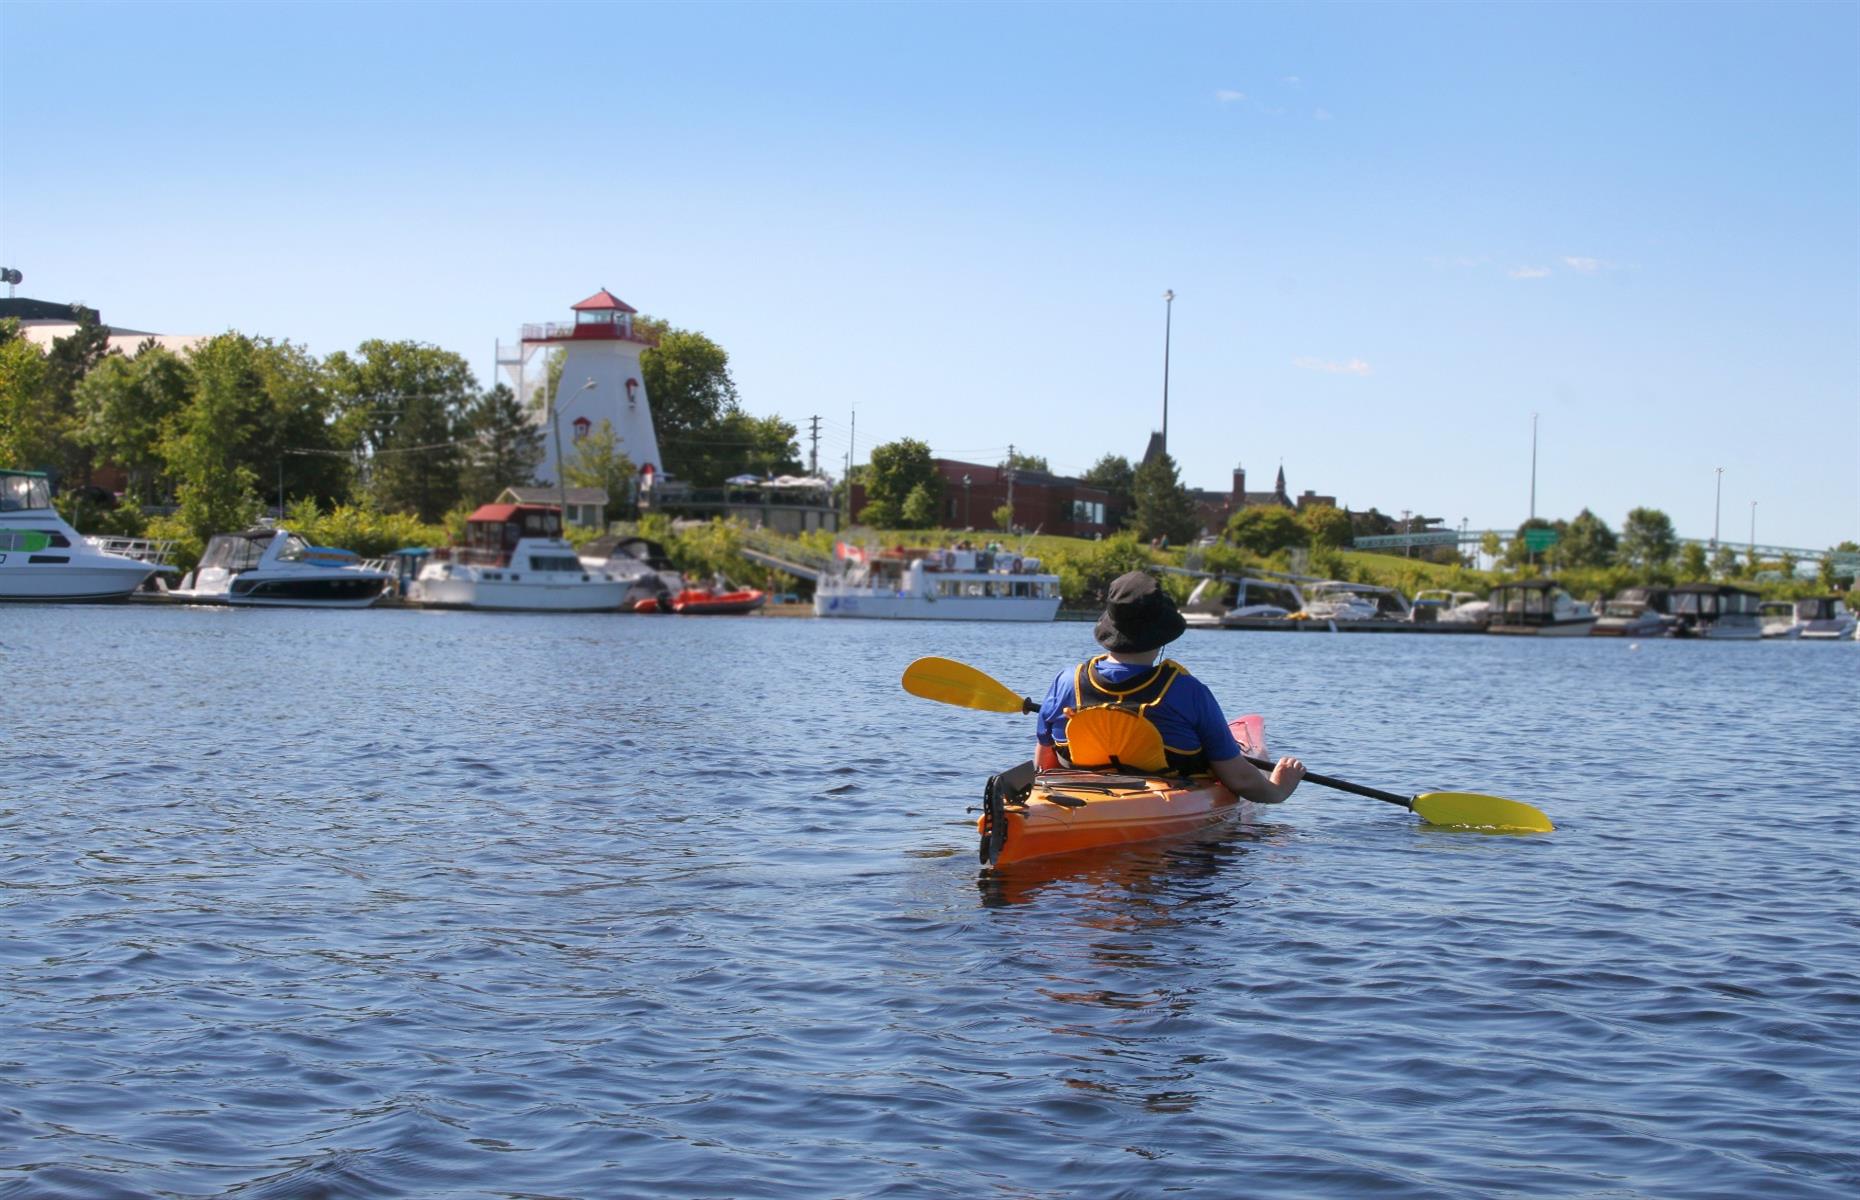 Like all of Canada’s Maritimes, there’s also some stunning scenery to be found in Fredericton. The city is bisected by the St. John River which is popular with boaters. There’s also downhill skiing at nearby Crabbe Mountain and opportunities for outdoor adventures at Mactaquac Provincial Park, about a 30-minute drive away.